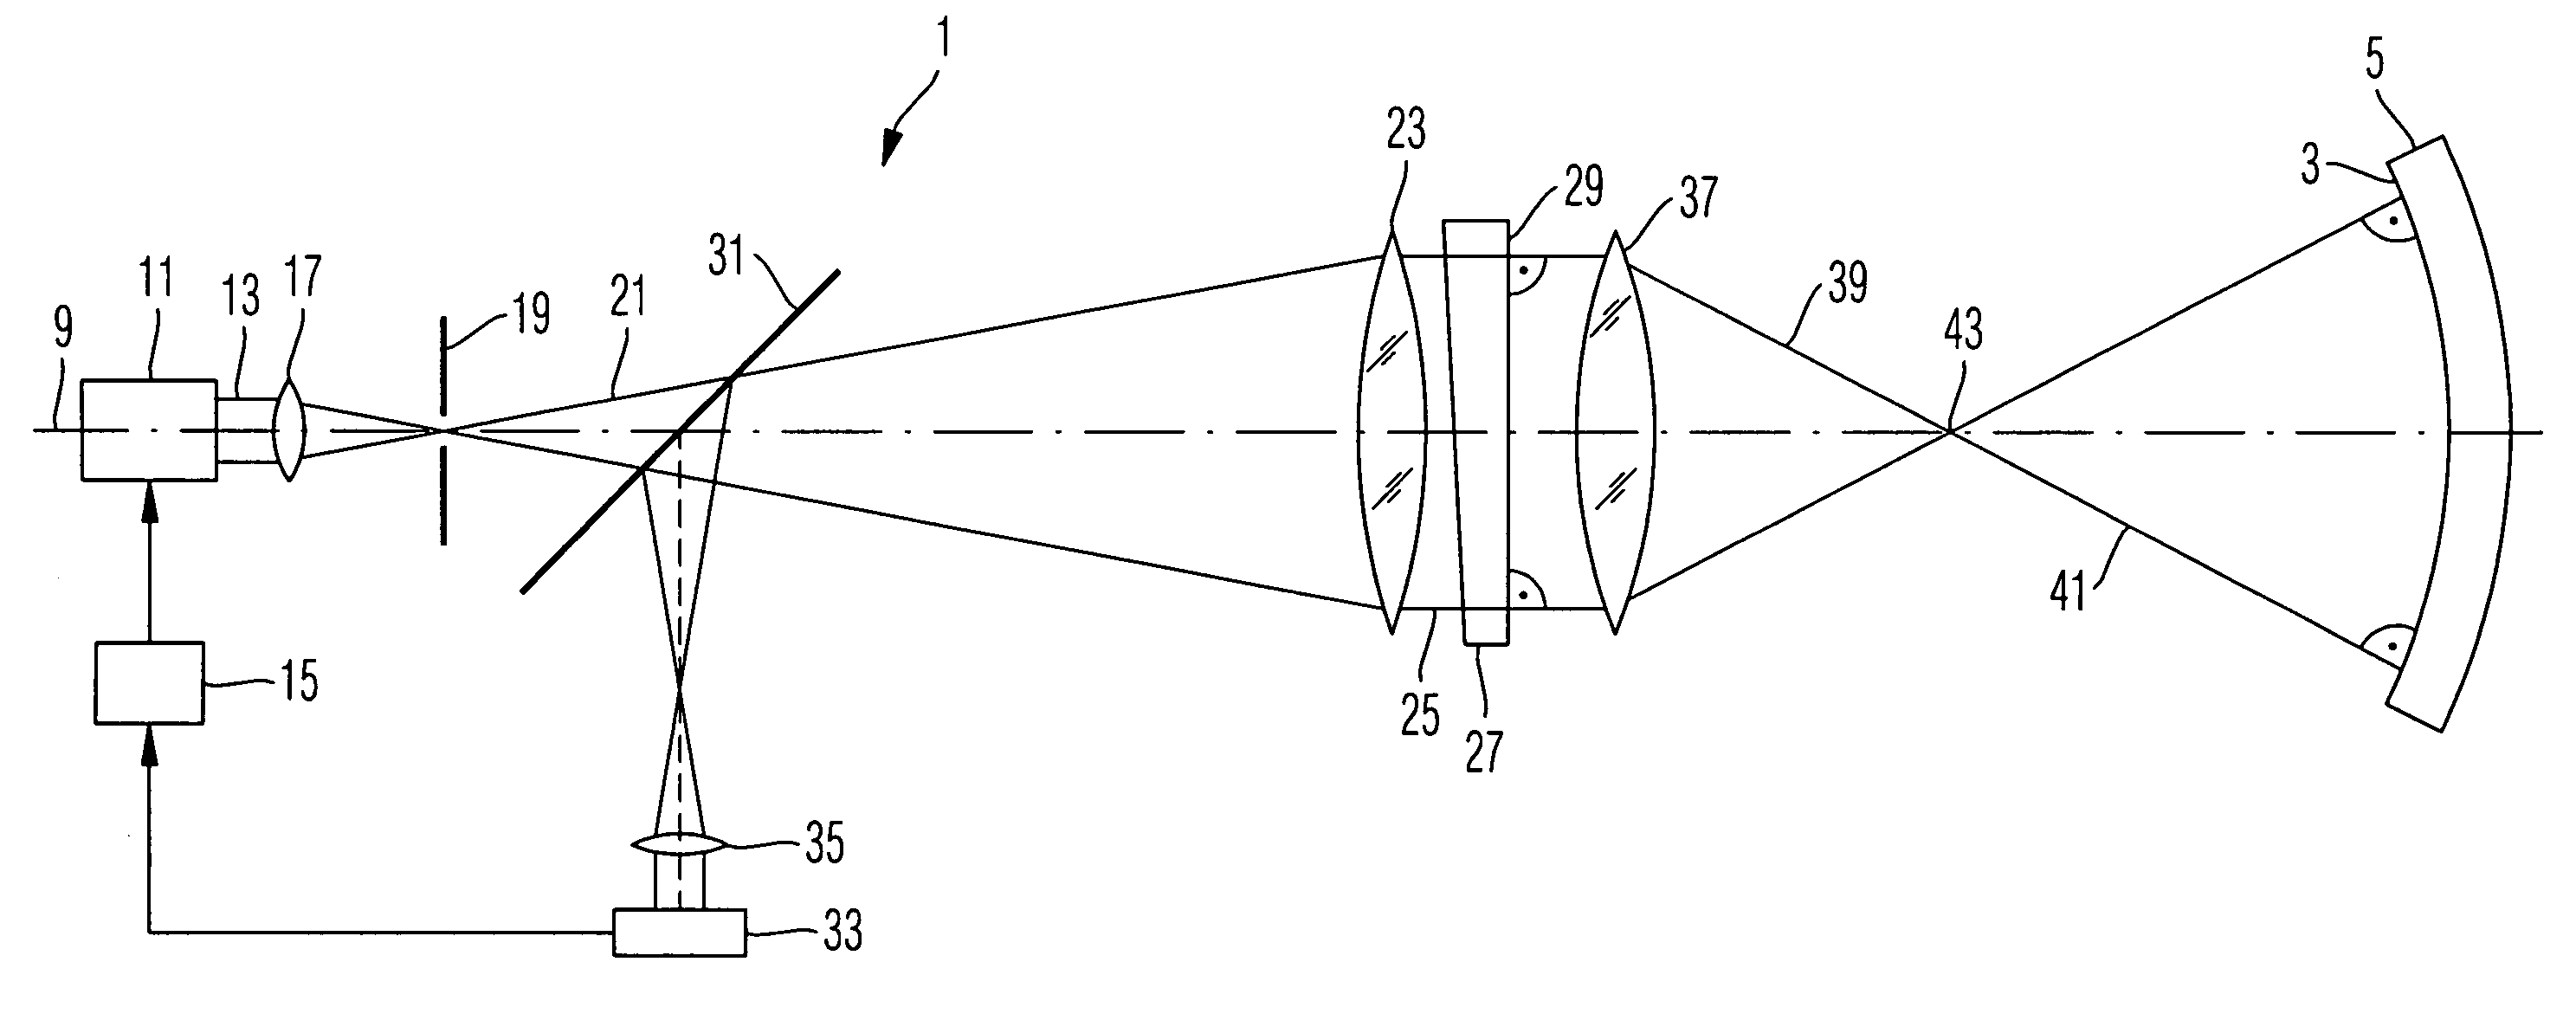 Phase shifting interferometric method, interferometer apparatus and method of manufacturing an optical element